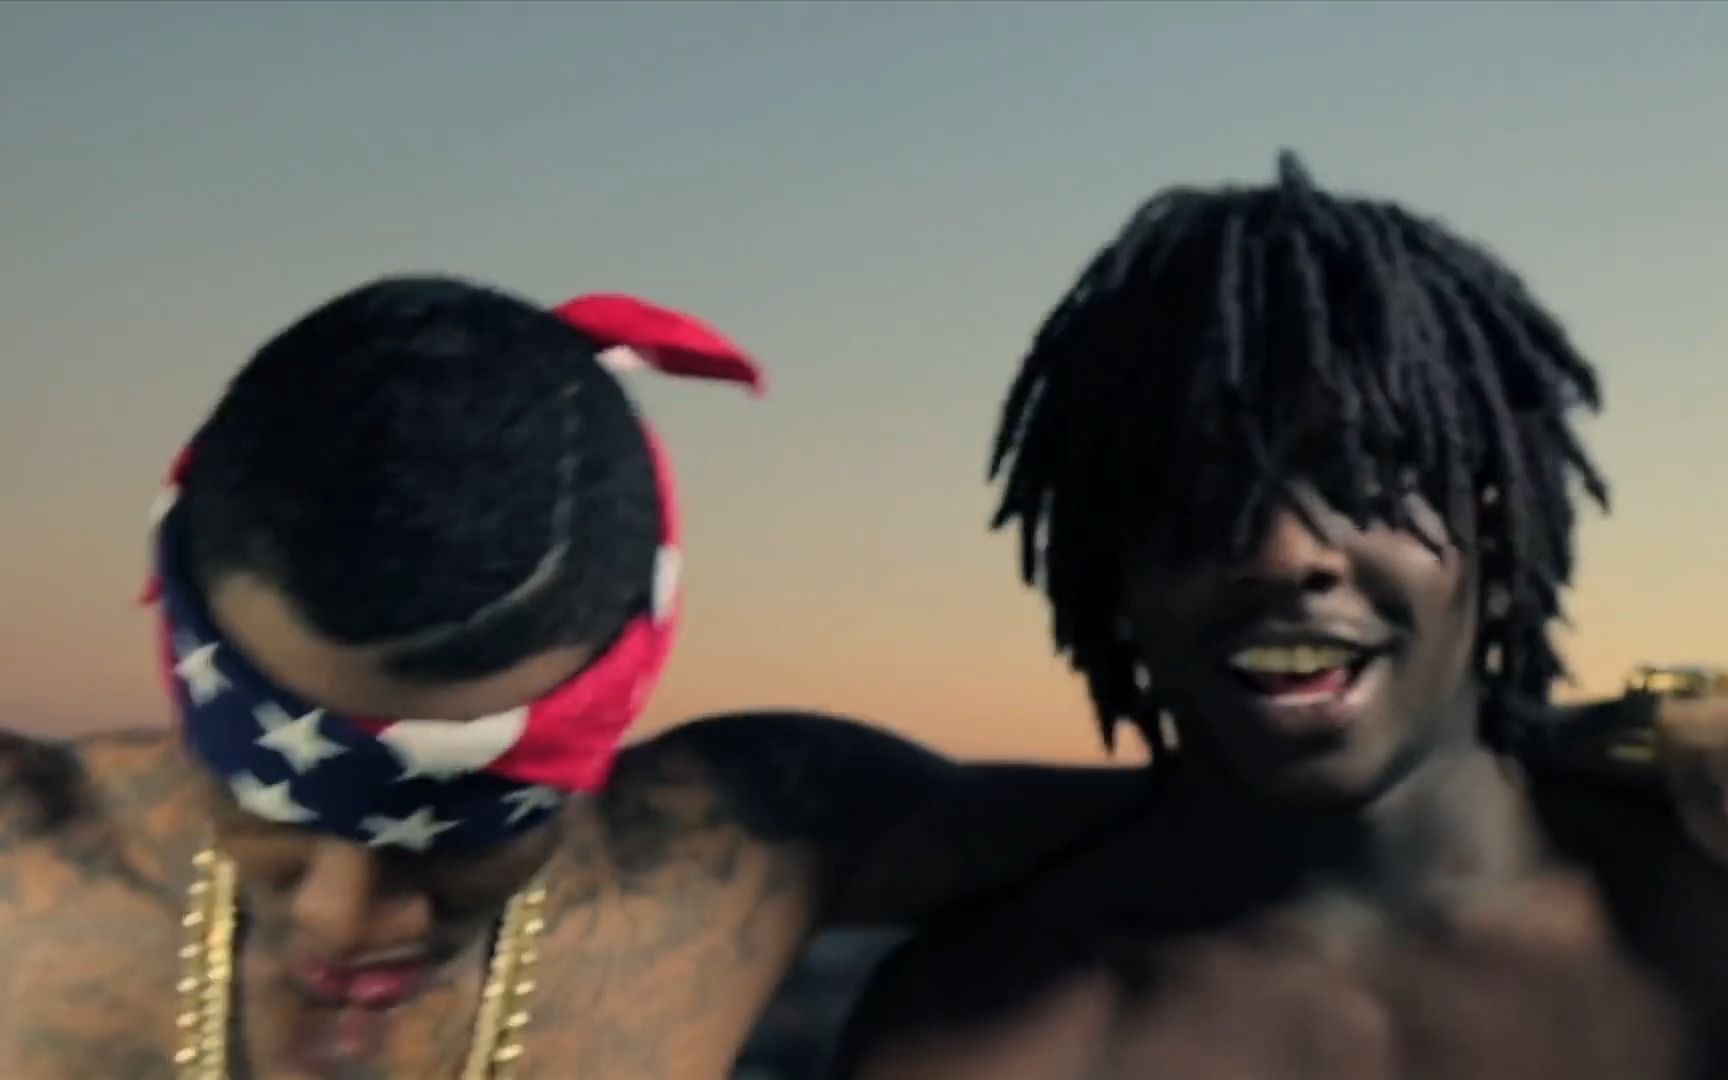 Soulja Boy ft Chief Keef  - Foreign Cars  Directed by WhoisHiDef